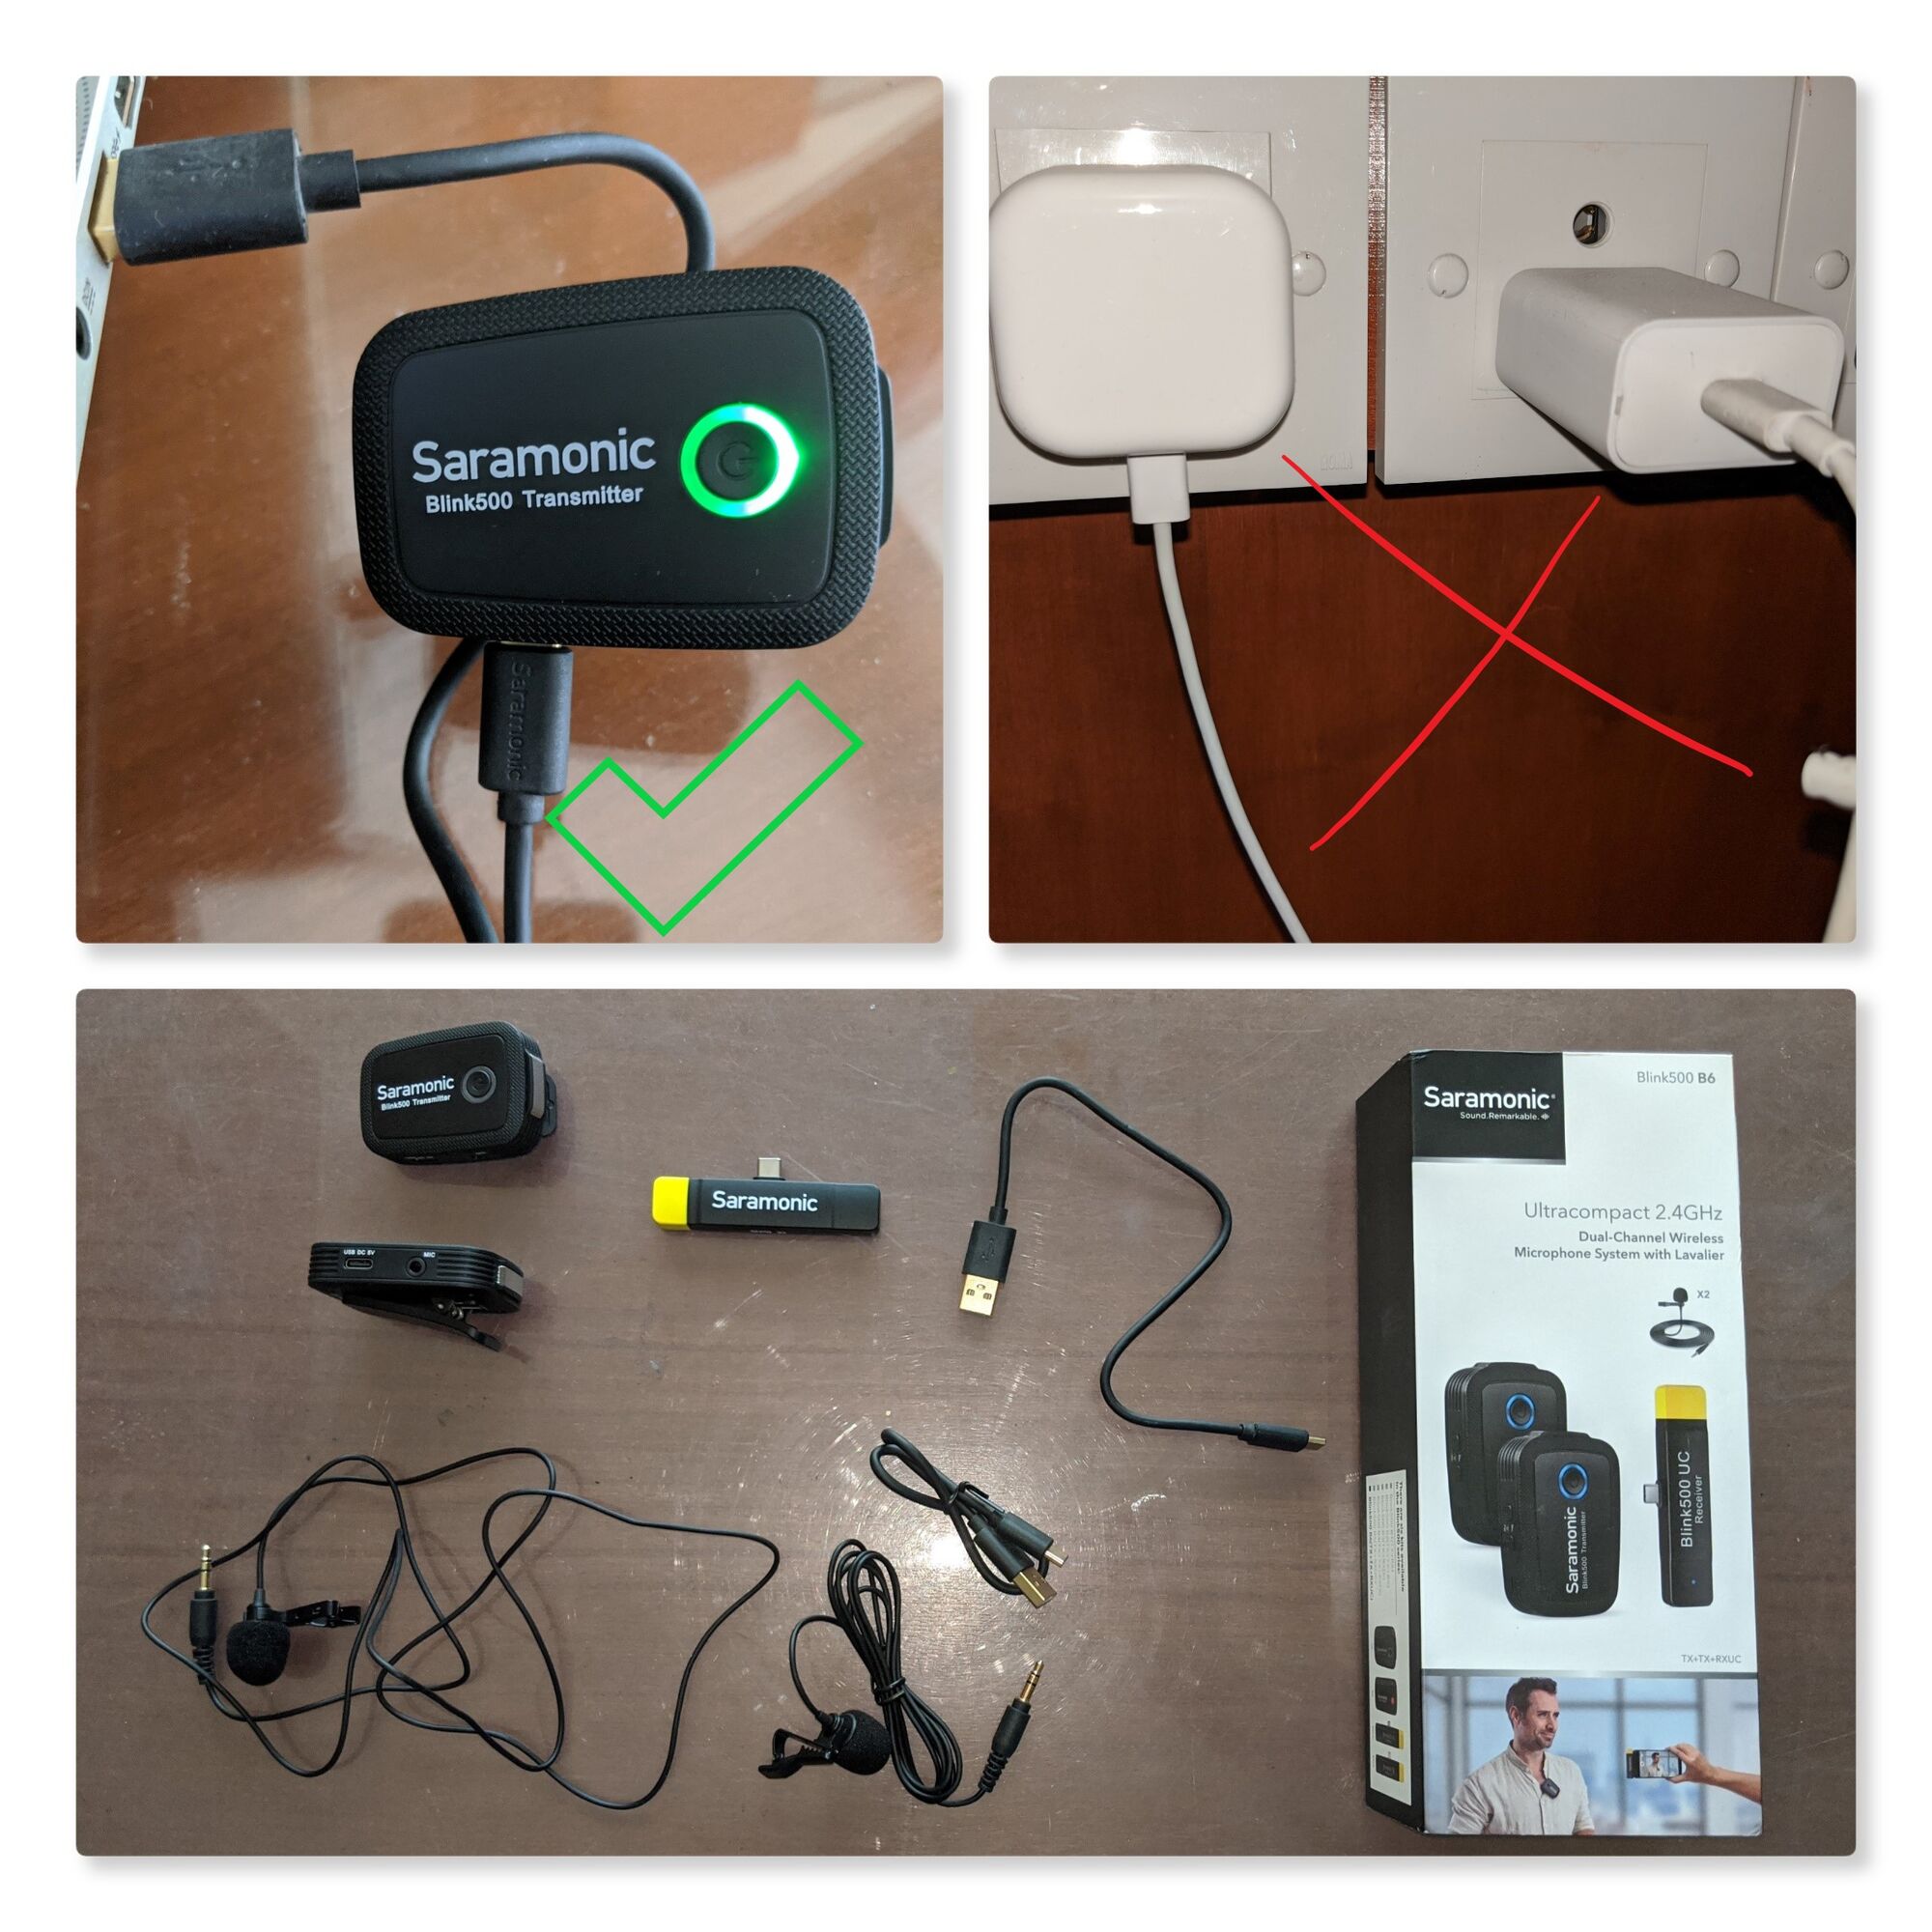 Use only the USB-C charging cable that comes in the box to charge the Saramonic Blink500 B6